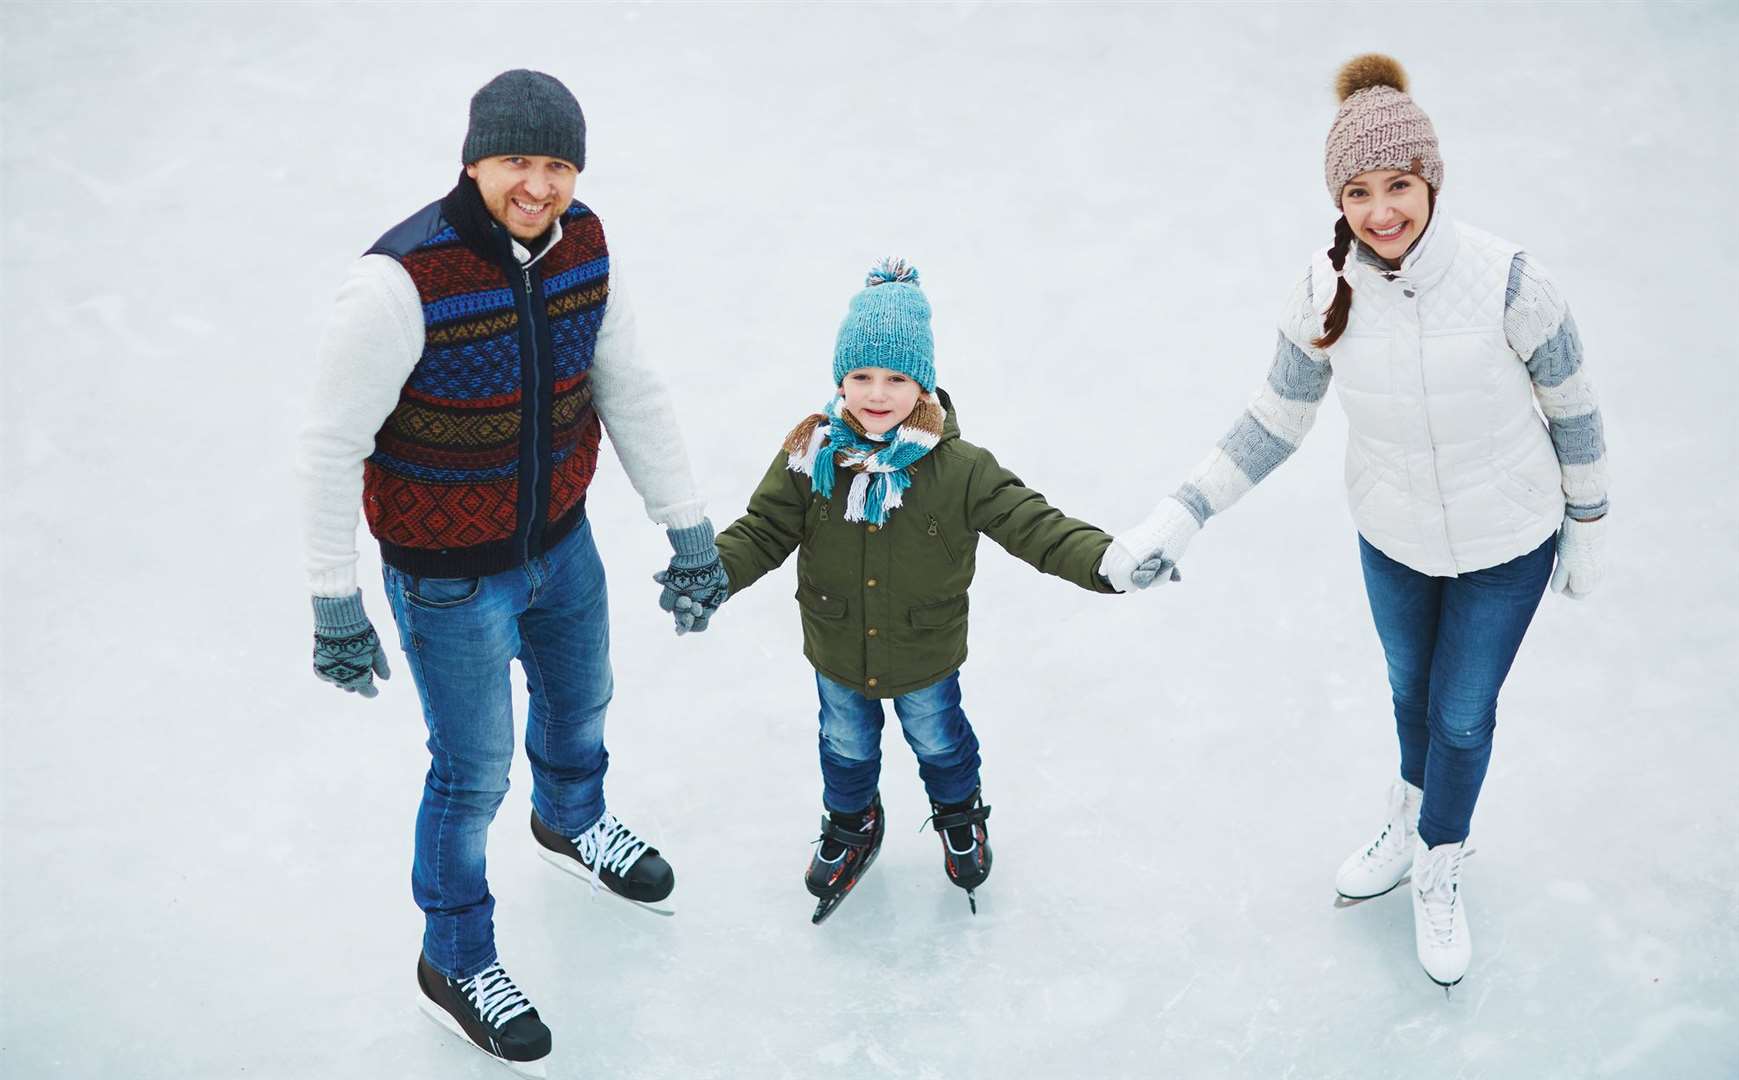 Ice skating for all ages will be on offer with Skate in Tunbridge Wells